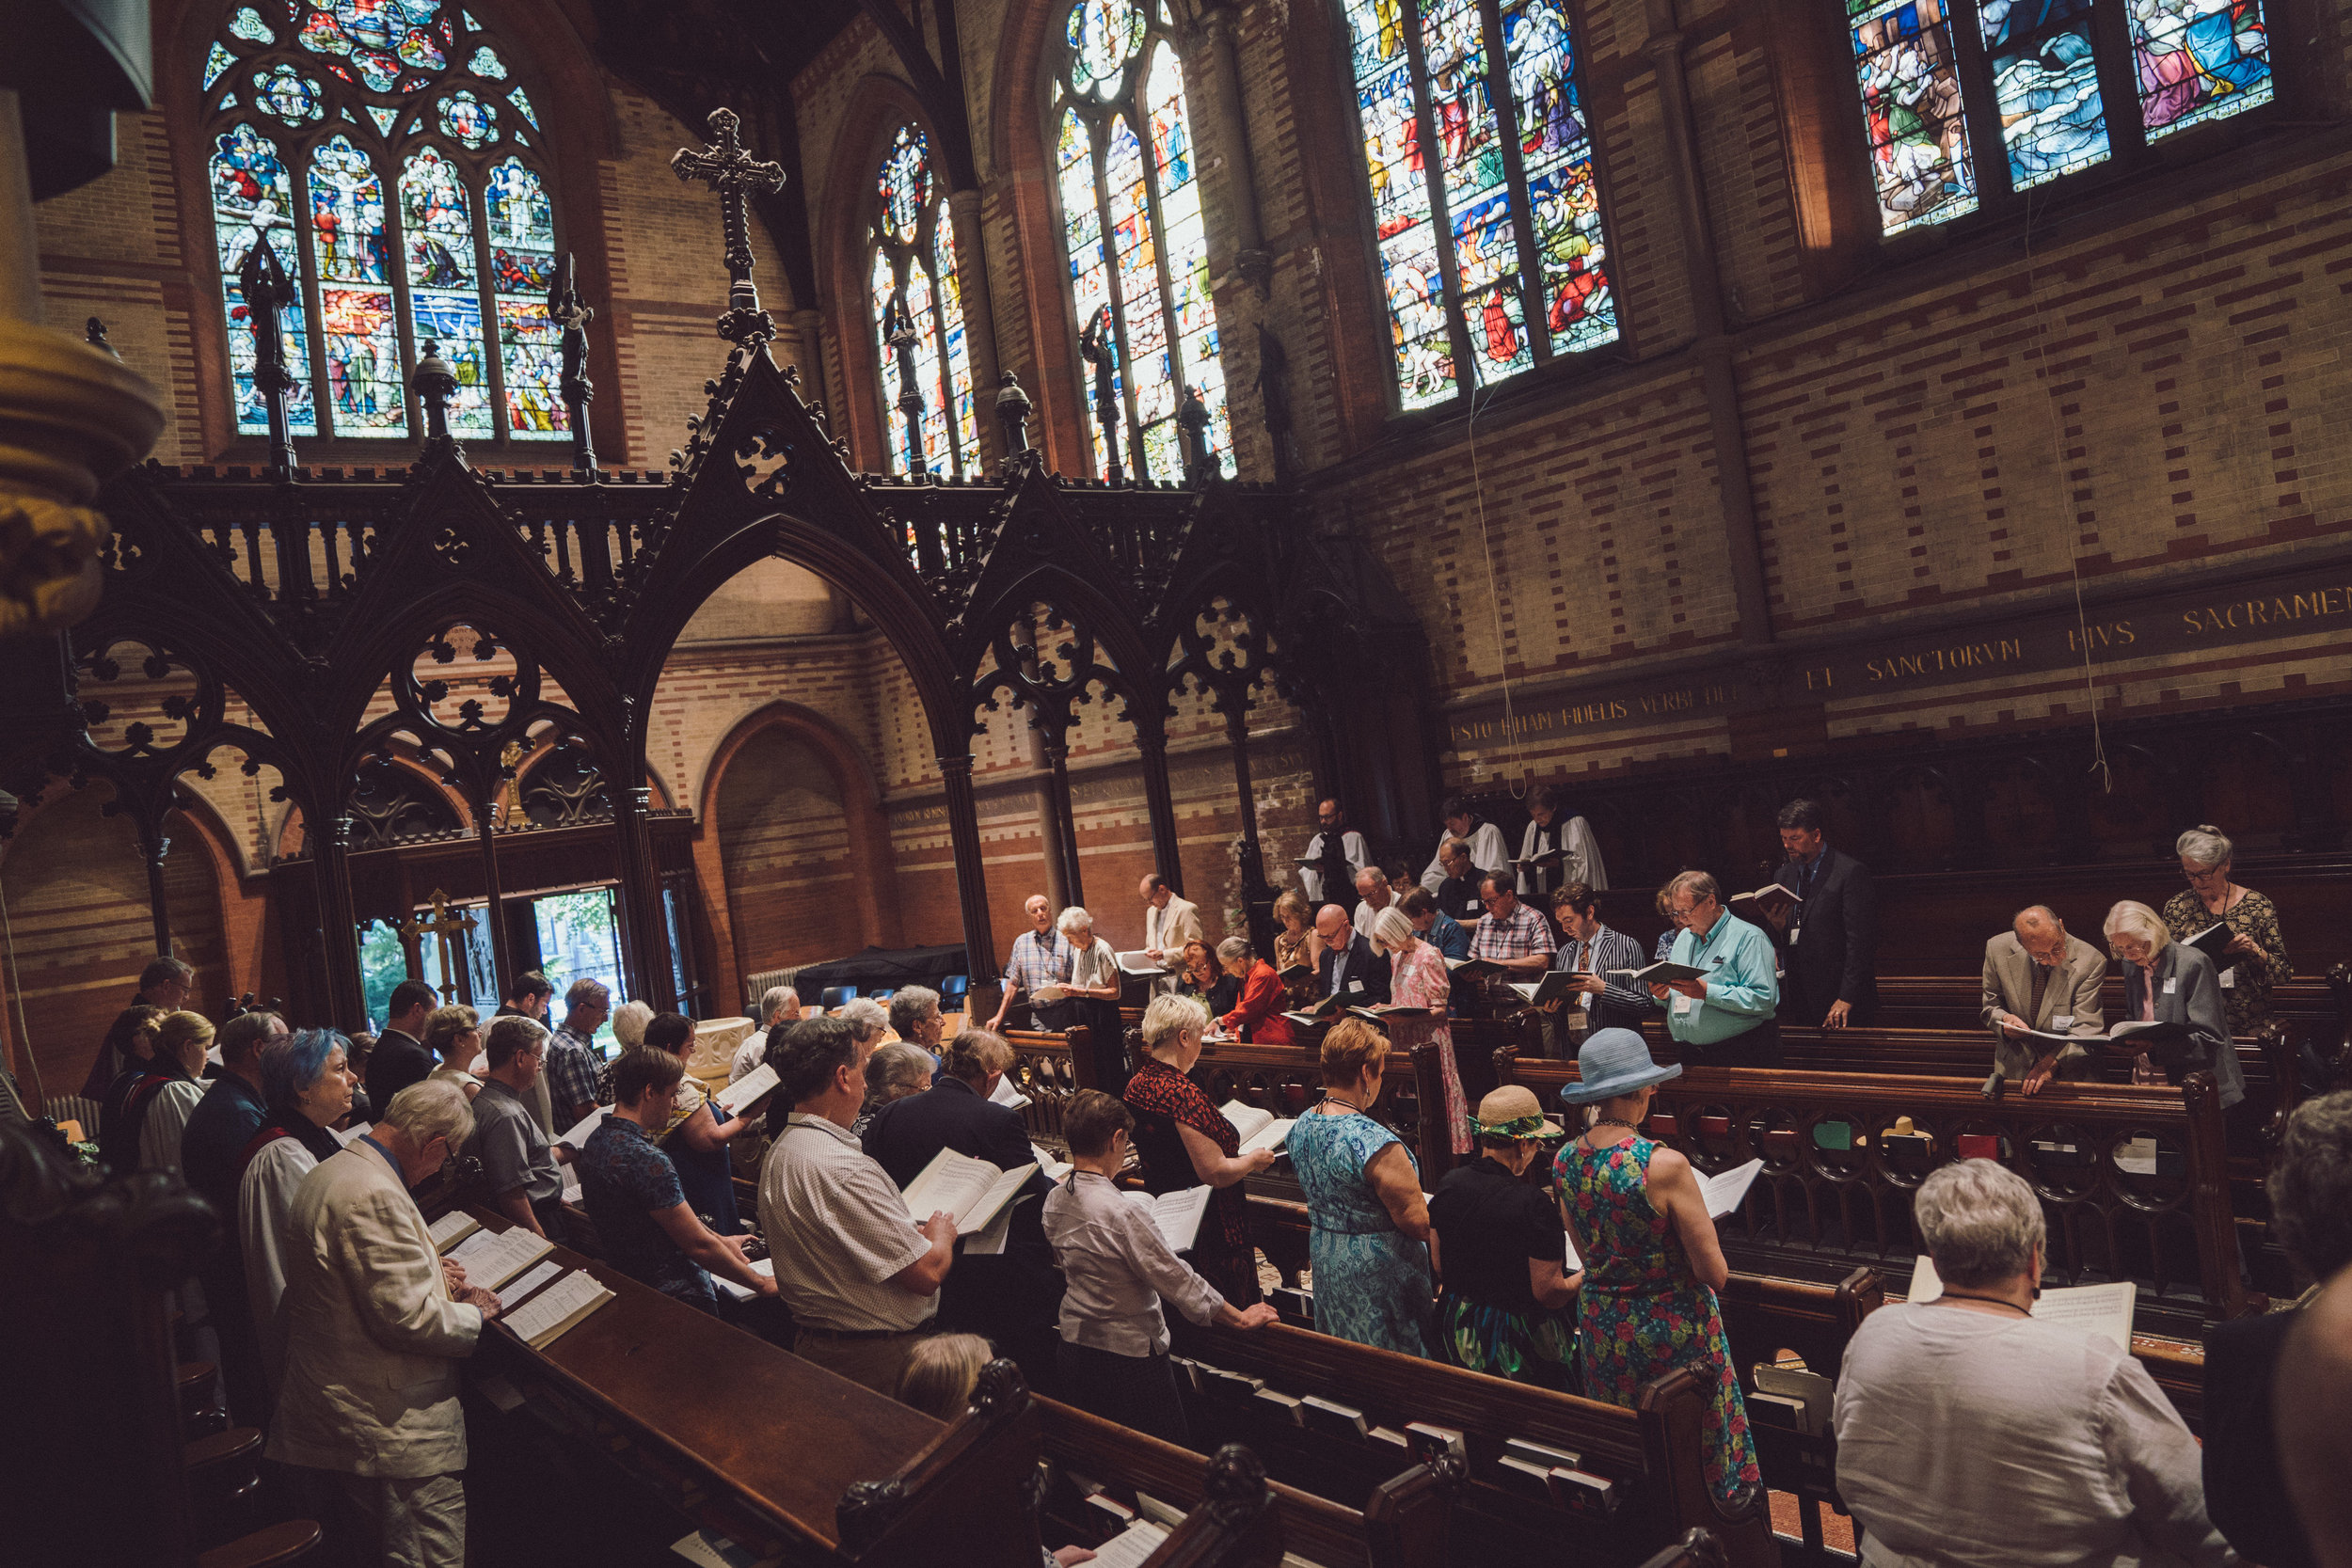  Mass at The General Seminary in New York NY. Photo by Daniel Lee. 